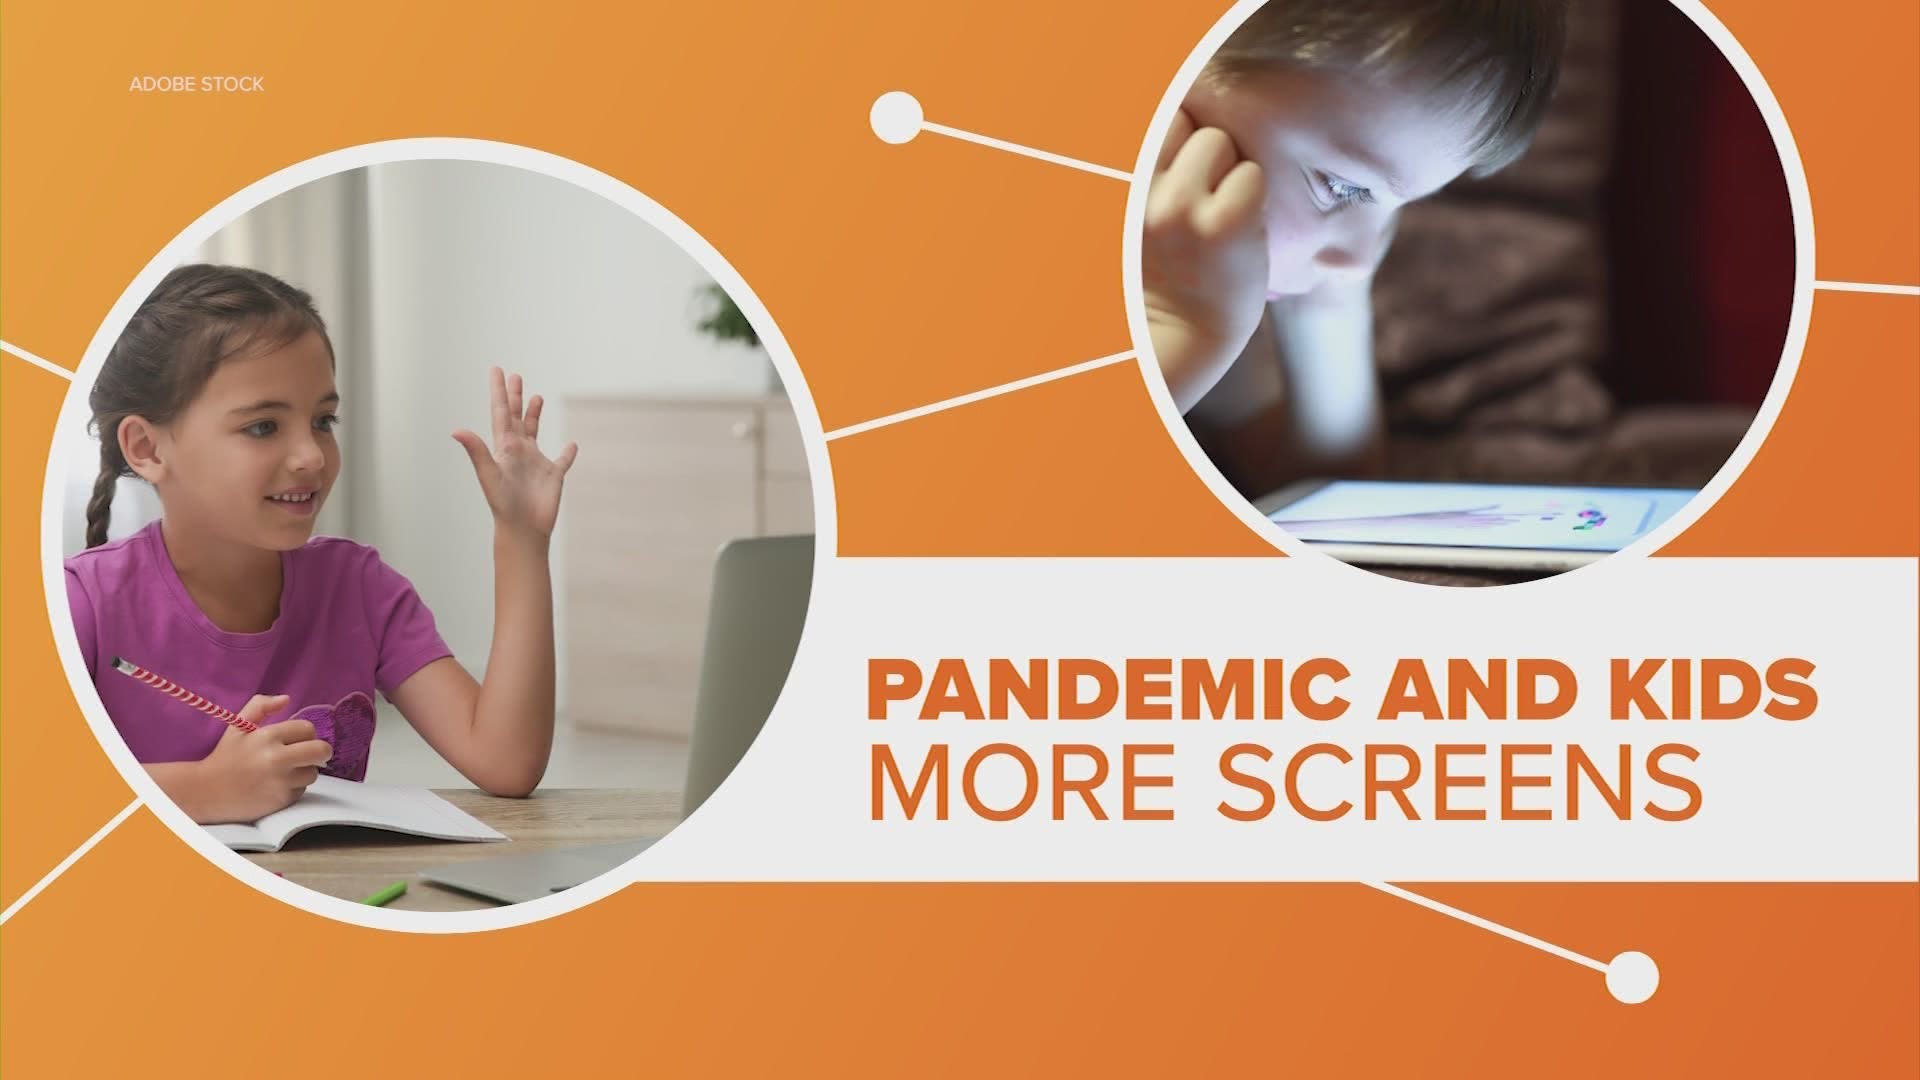 Kids screen time has gone way up during the pandemic. But experts recommend as lockdowns slowly lift now is the time to make some changes.